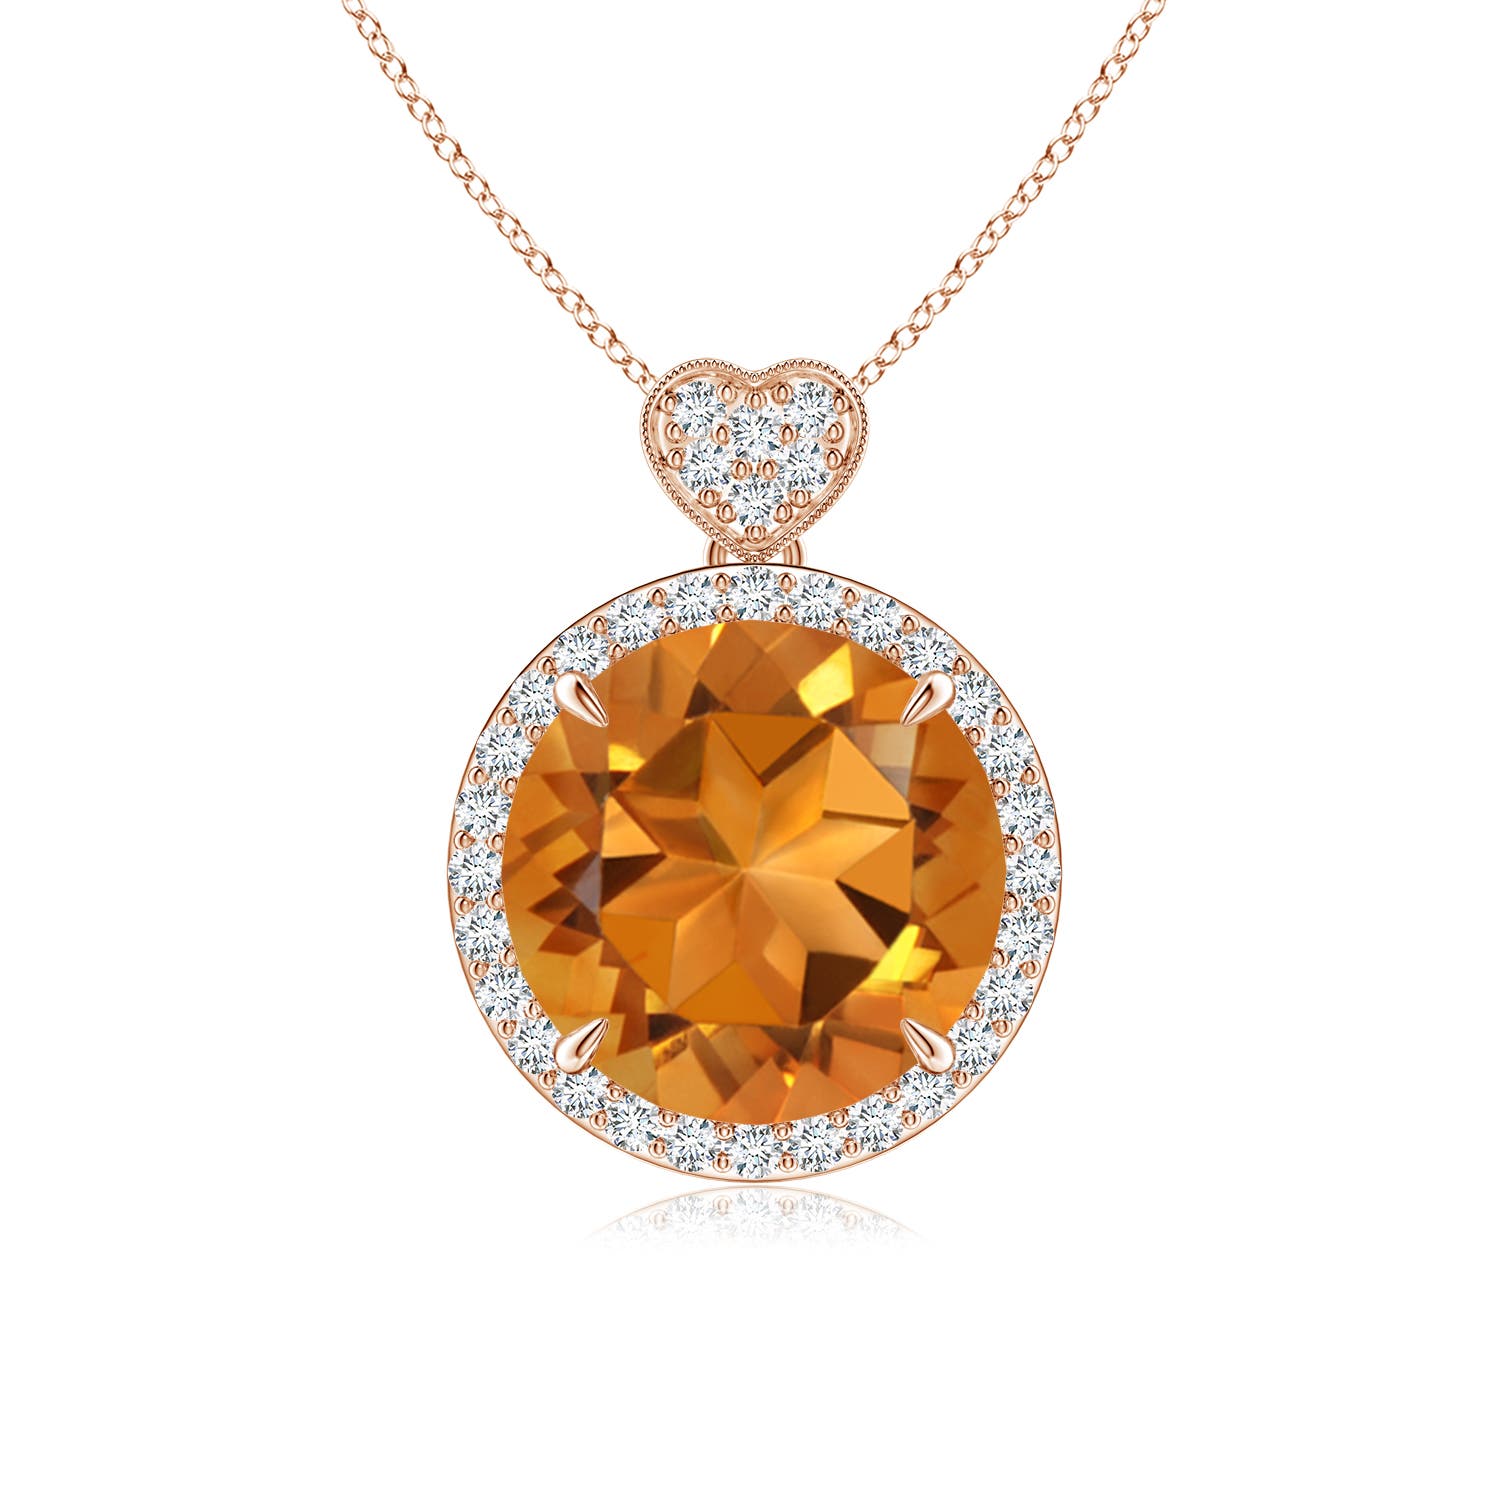 AAA - Citrine / 3.4 CT / 14 KT Rose Gold